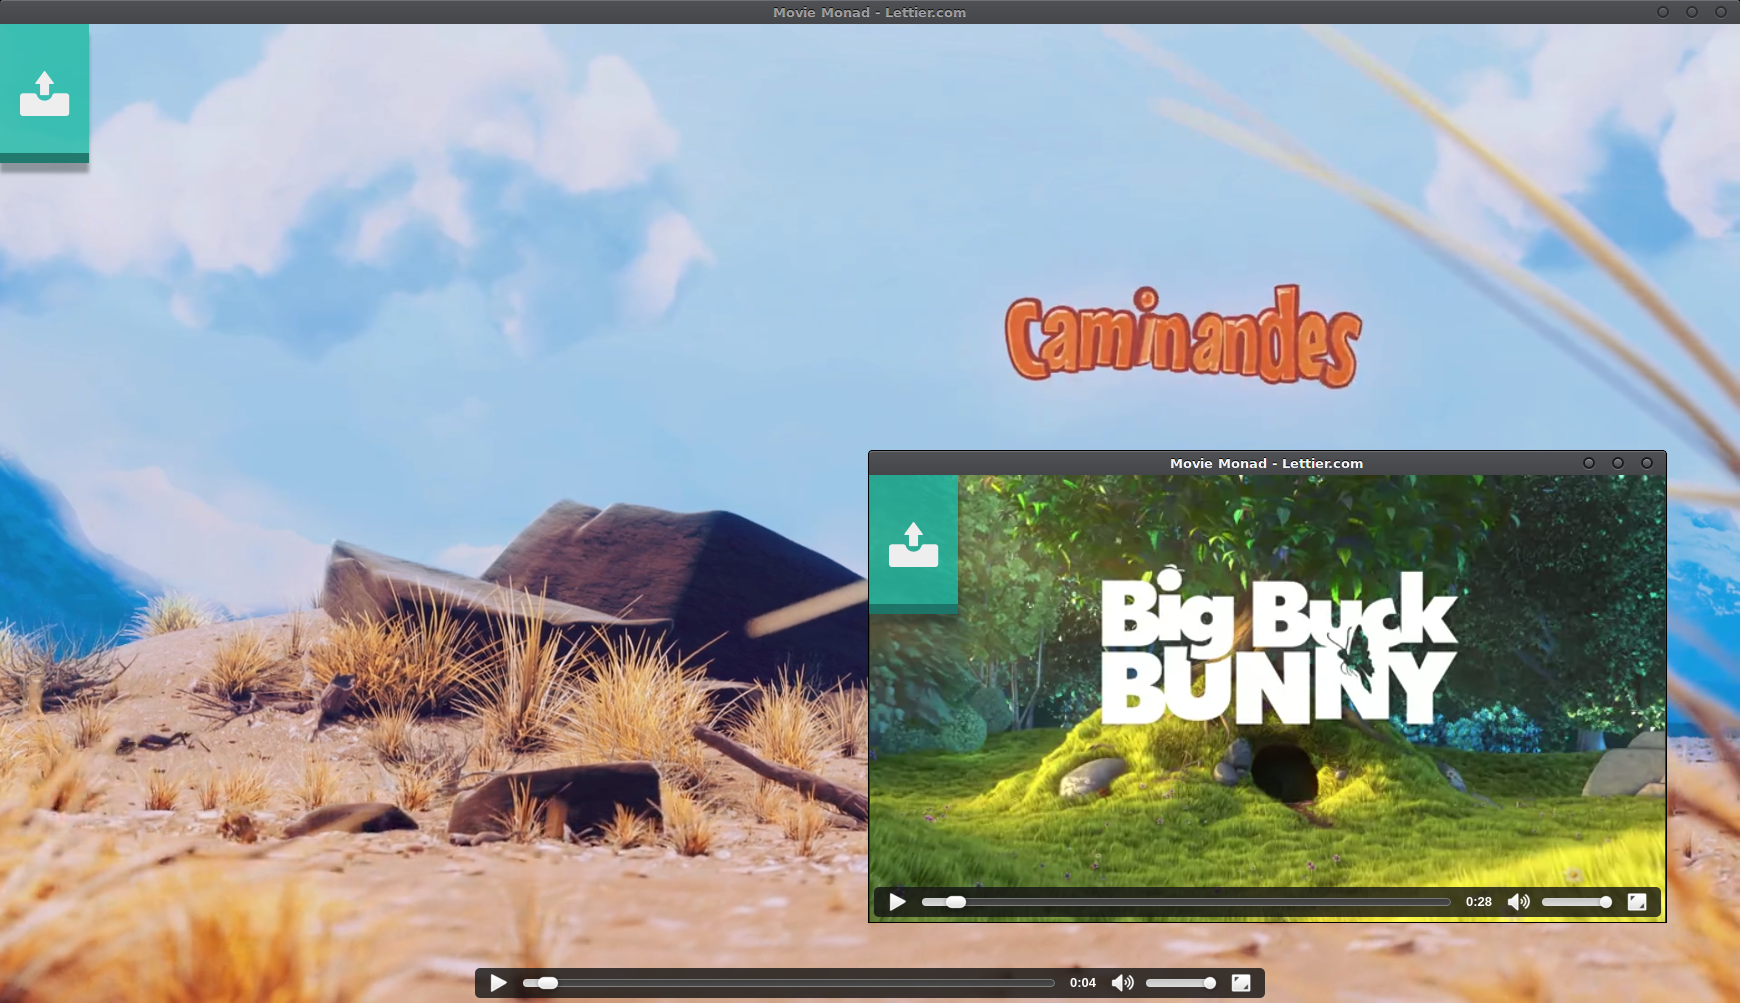 Caminandes and Big Buck Bunny from Blender Cloud.